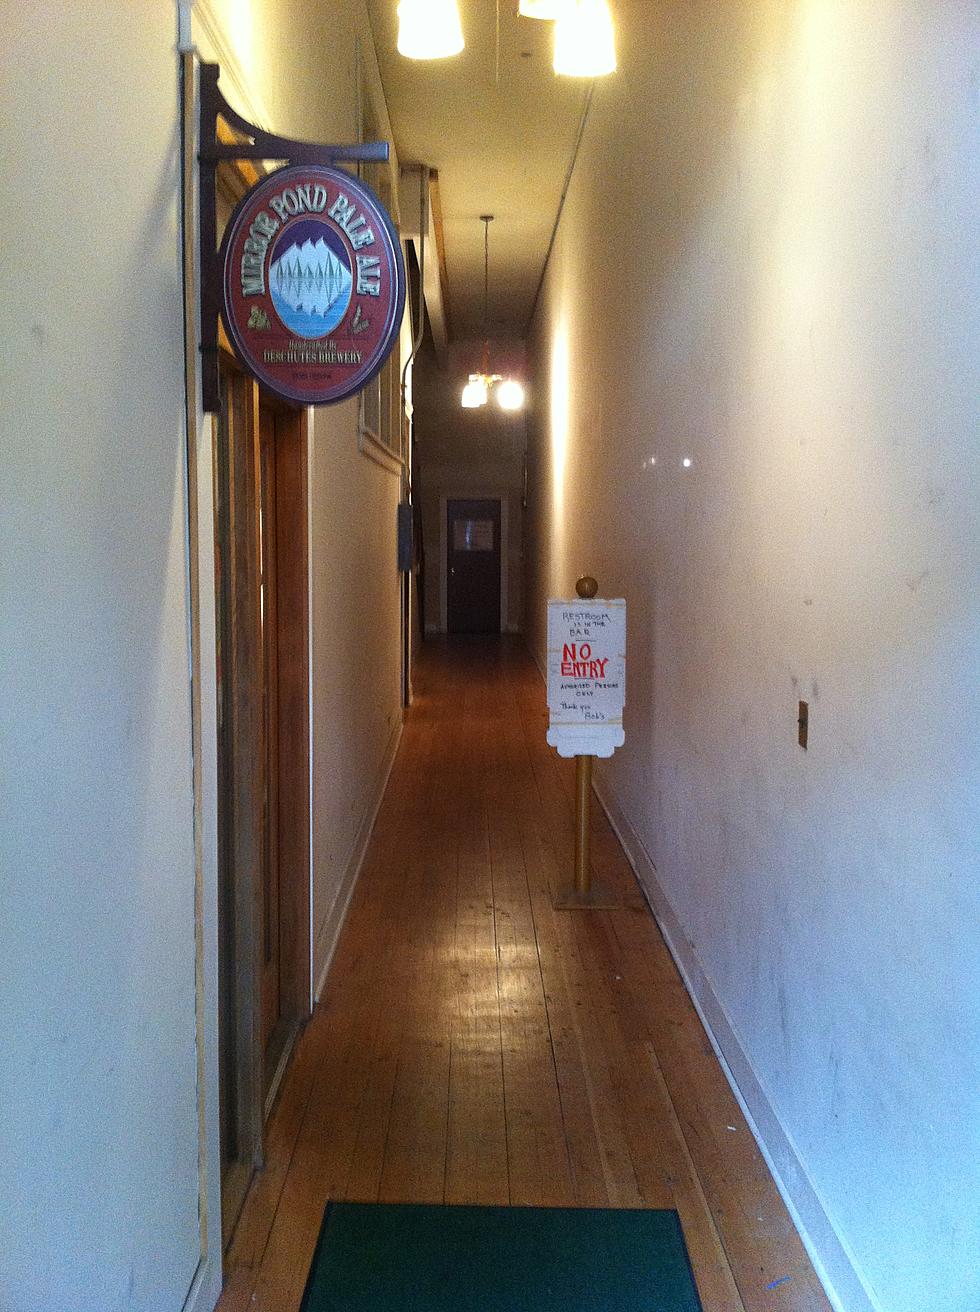 Do You Know Where To Find This Hallway in Yakima?